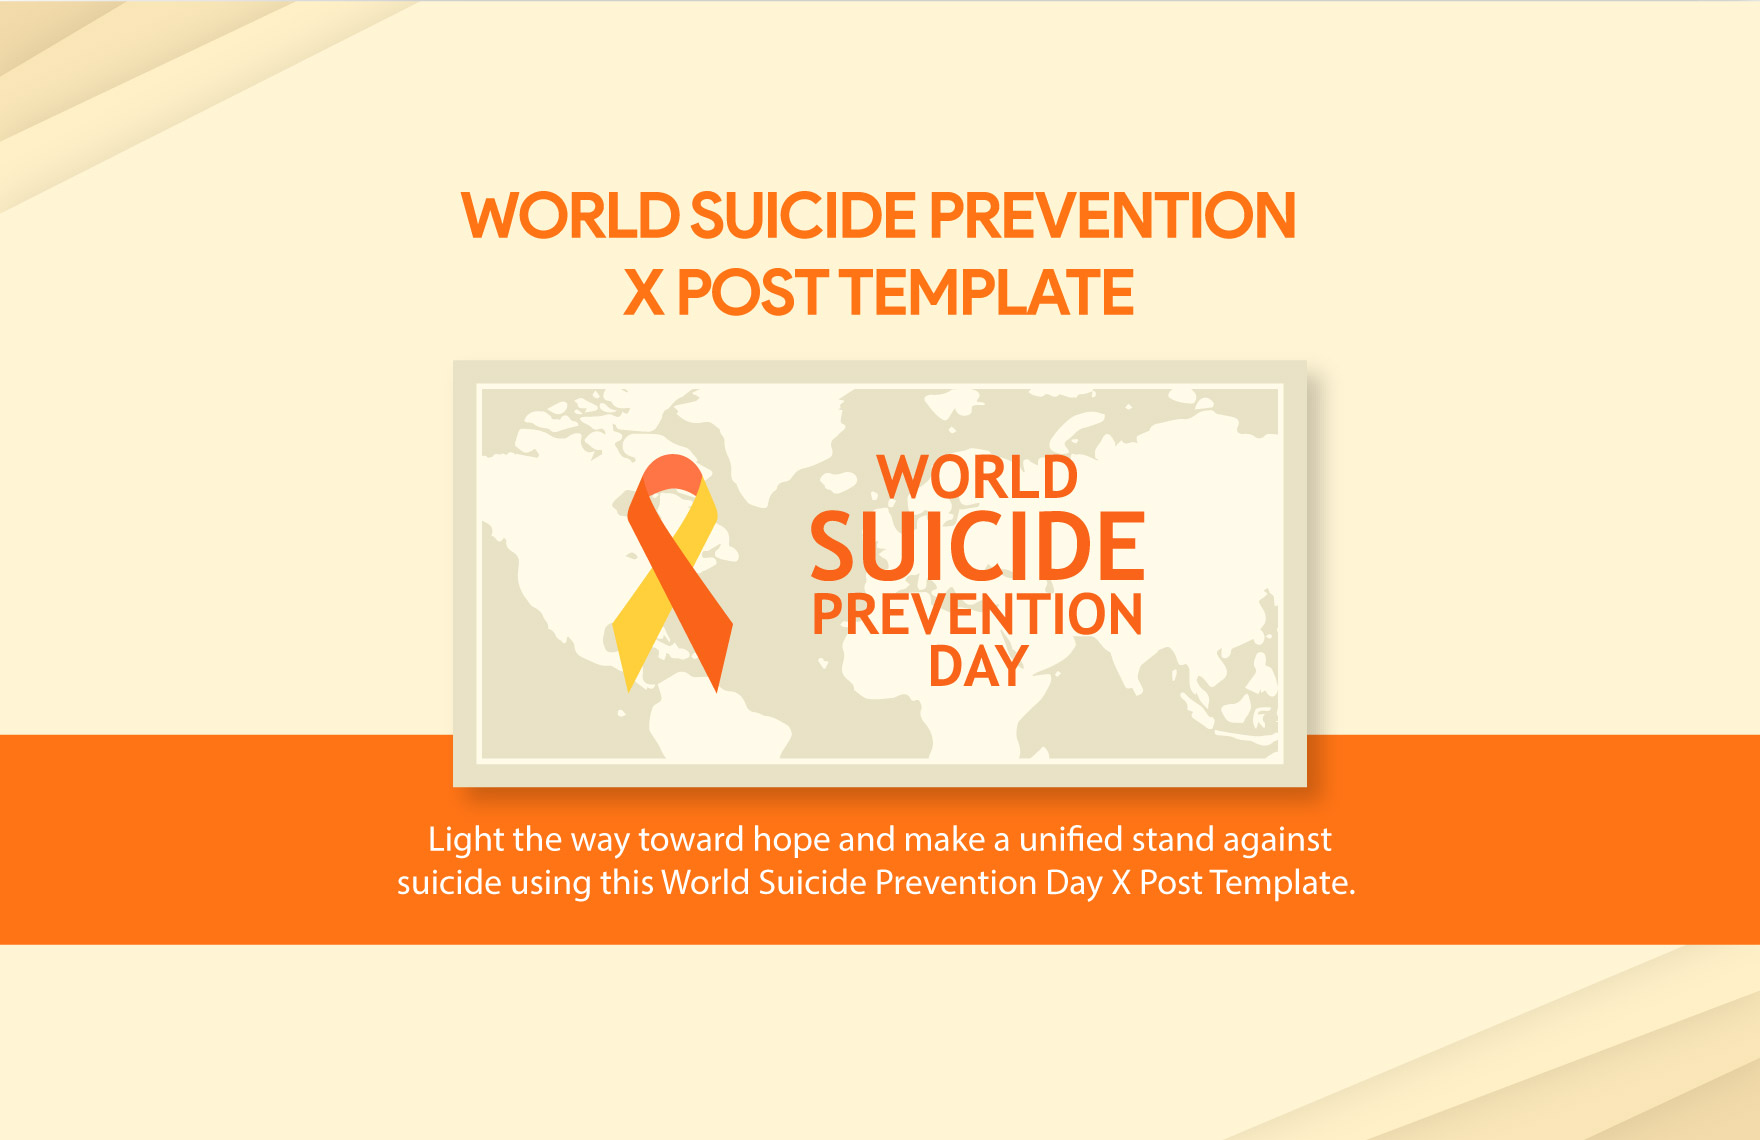 World Suicide Prevention Day X Post Template in Illustrator, PNG, PSD ...